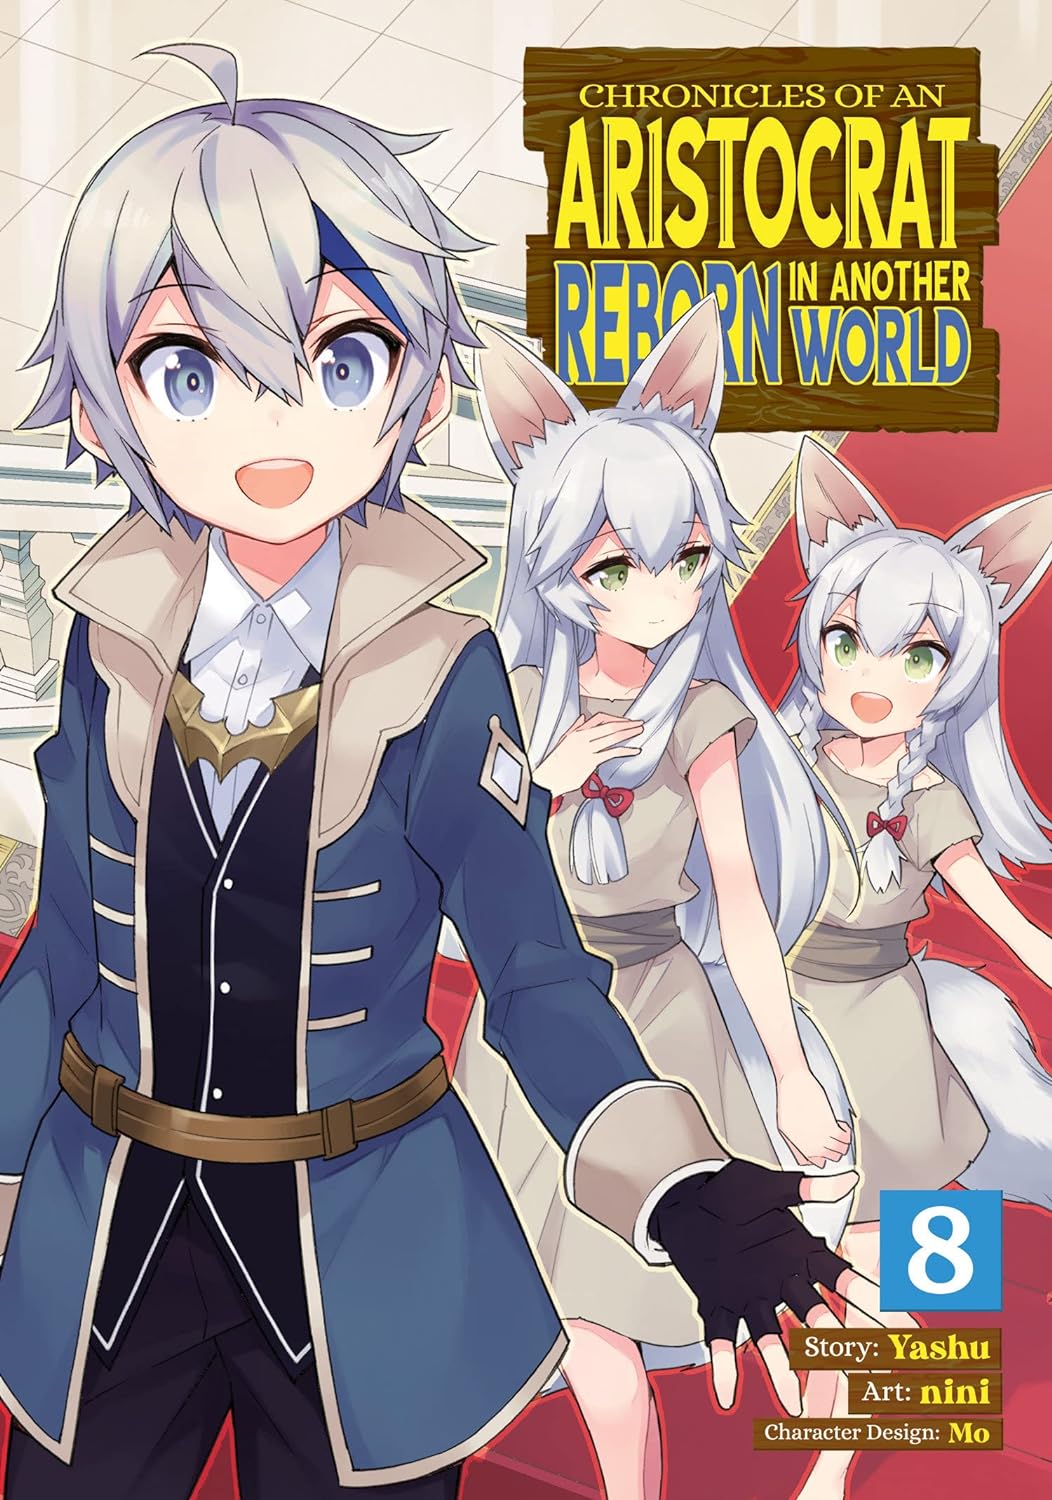 Chronicles of an Aristocrat Reborn in Another World (Manga) Vol. 08